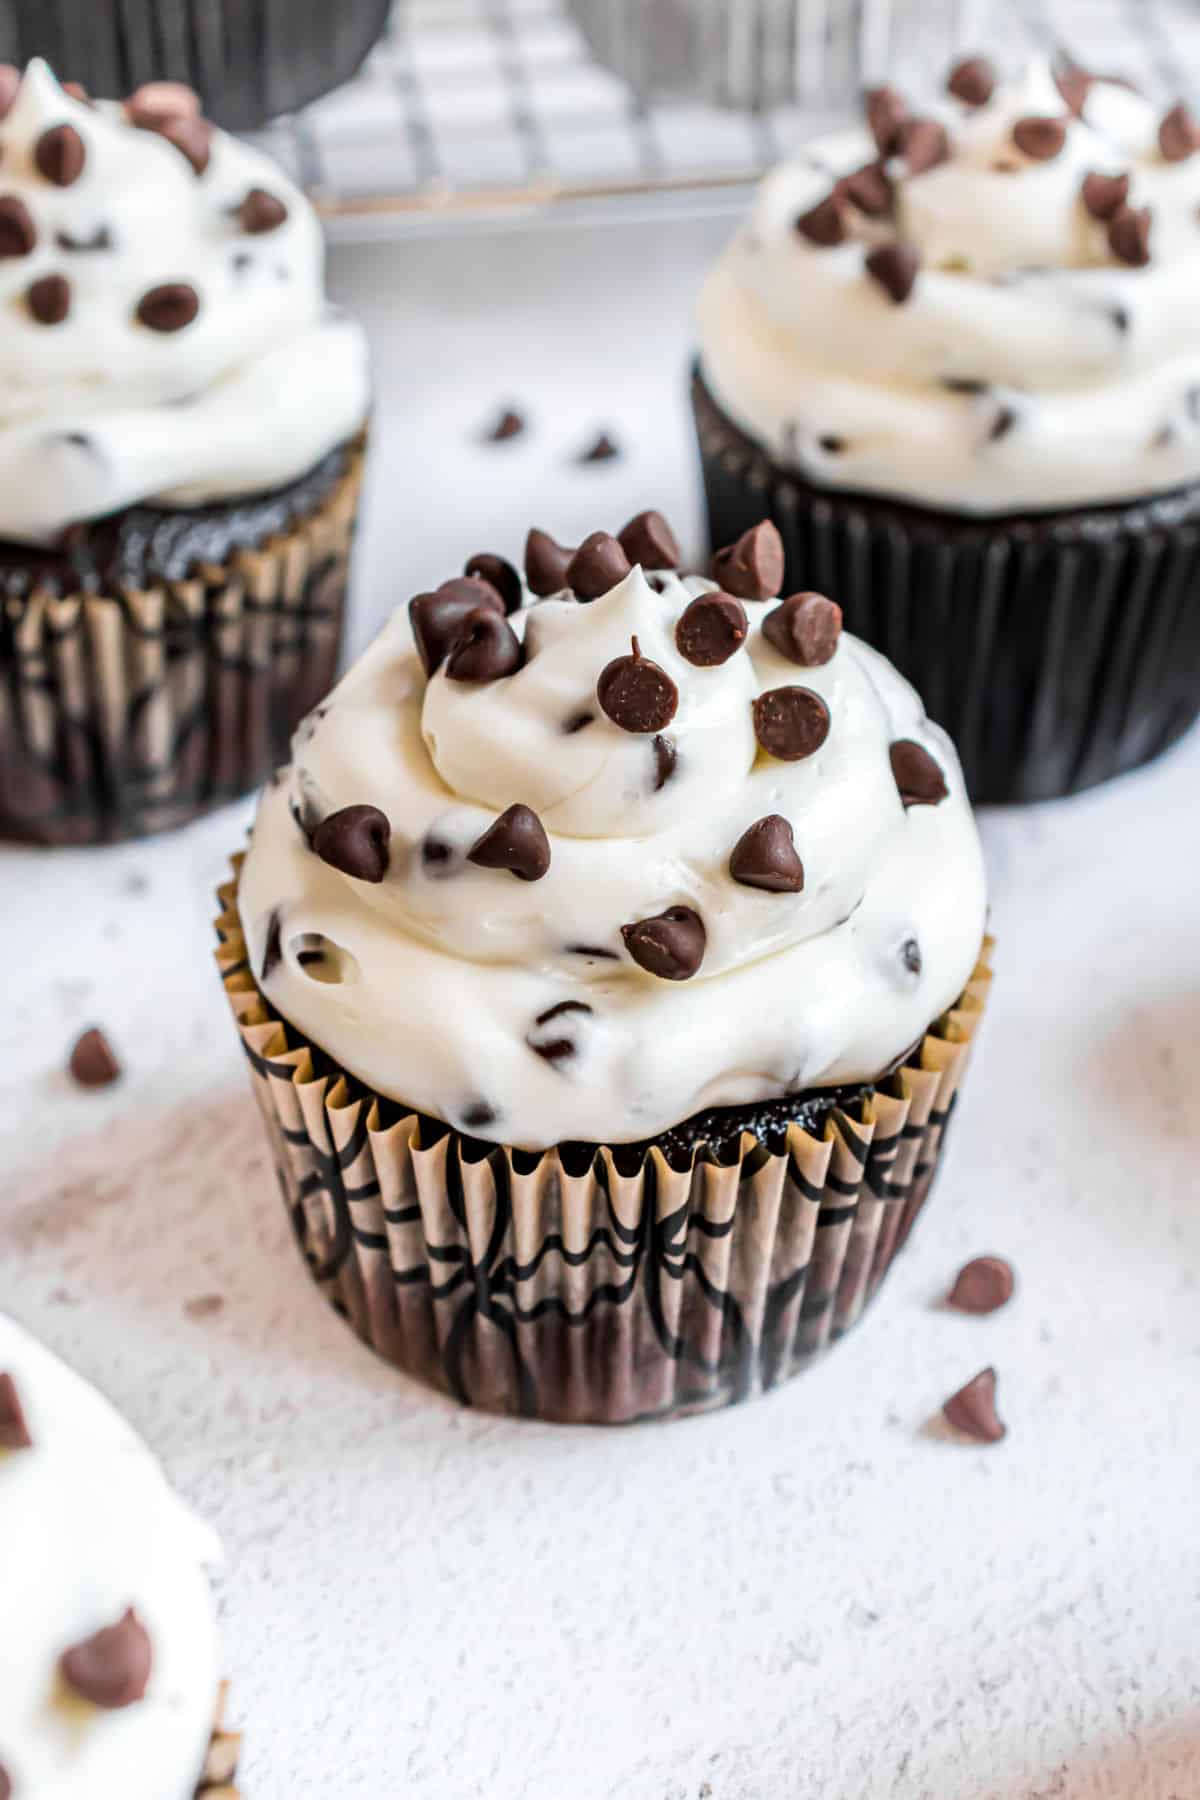 Chocolate cupcakes with cheesecake frosting and mini chocolate chips on top.